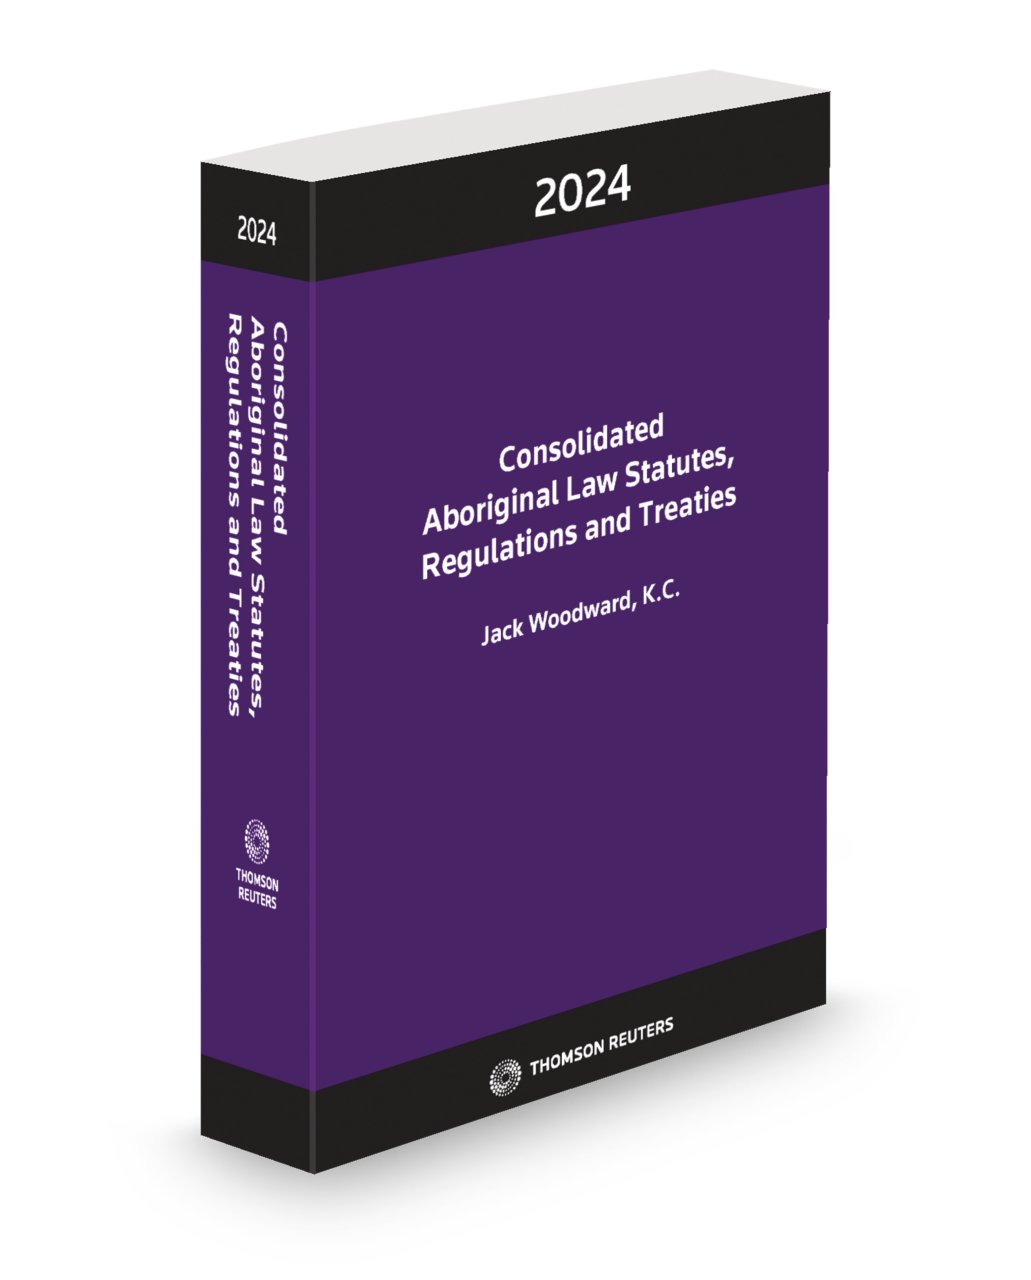 Cover image of Consolidated Aboriginal Law Statutes, Regulations and Treaties, 2024